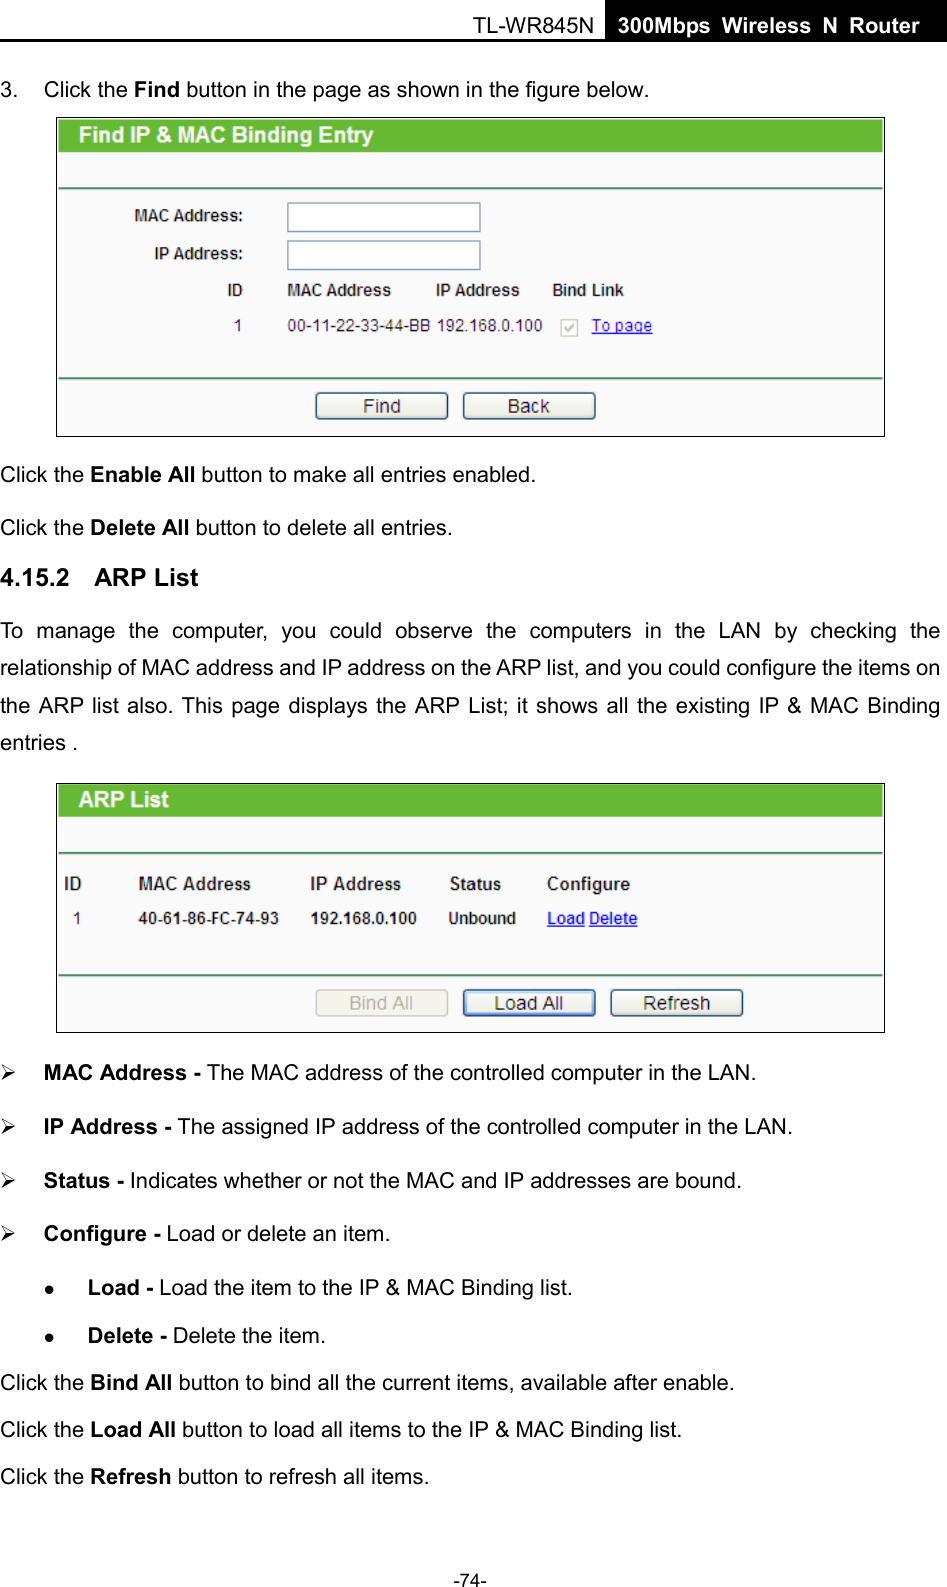  TL-WR845N  300Mbps Wireless N Router    3. Click the Find button in the page as shown in the figure below.  Click the Enable All button to make all entries enabled. Click the Delete All button to delete all entries. 4.15.2 ARP List To manage the computer, you could observe the computers in the LAN by checking the relationship of MAC address and IP address on the ARP list, and you could configure the items on the ARP list also. This page displays the ARP List; it shows all the existing IP &amp; MAC Binding entries .     MAC Address - The MAC address of the controlled computer in the LAN.    IP Address - The assigned IP address of the controlled computer in the LAN.    Status - Indicates whether or not the MAC and IP addresses are bound.  Configure - Load or delete an item.    Load - Load the item to the IP &amp; MAC Binding list.    Delete - Delete the item.   Click the Bind All button to bind all the current items, available after enable. Click the Load All button to load all items to the IP &amp; MAC Binding list. Click the Refresh button to refresh all items. -74- 